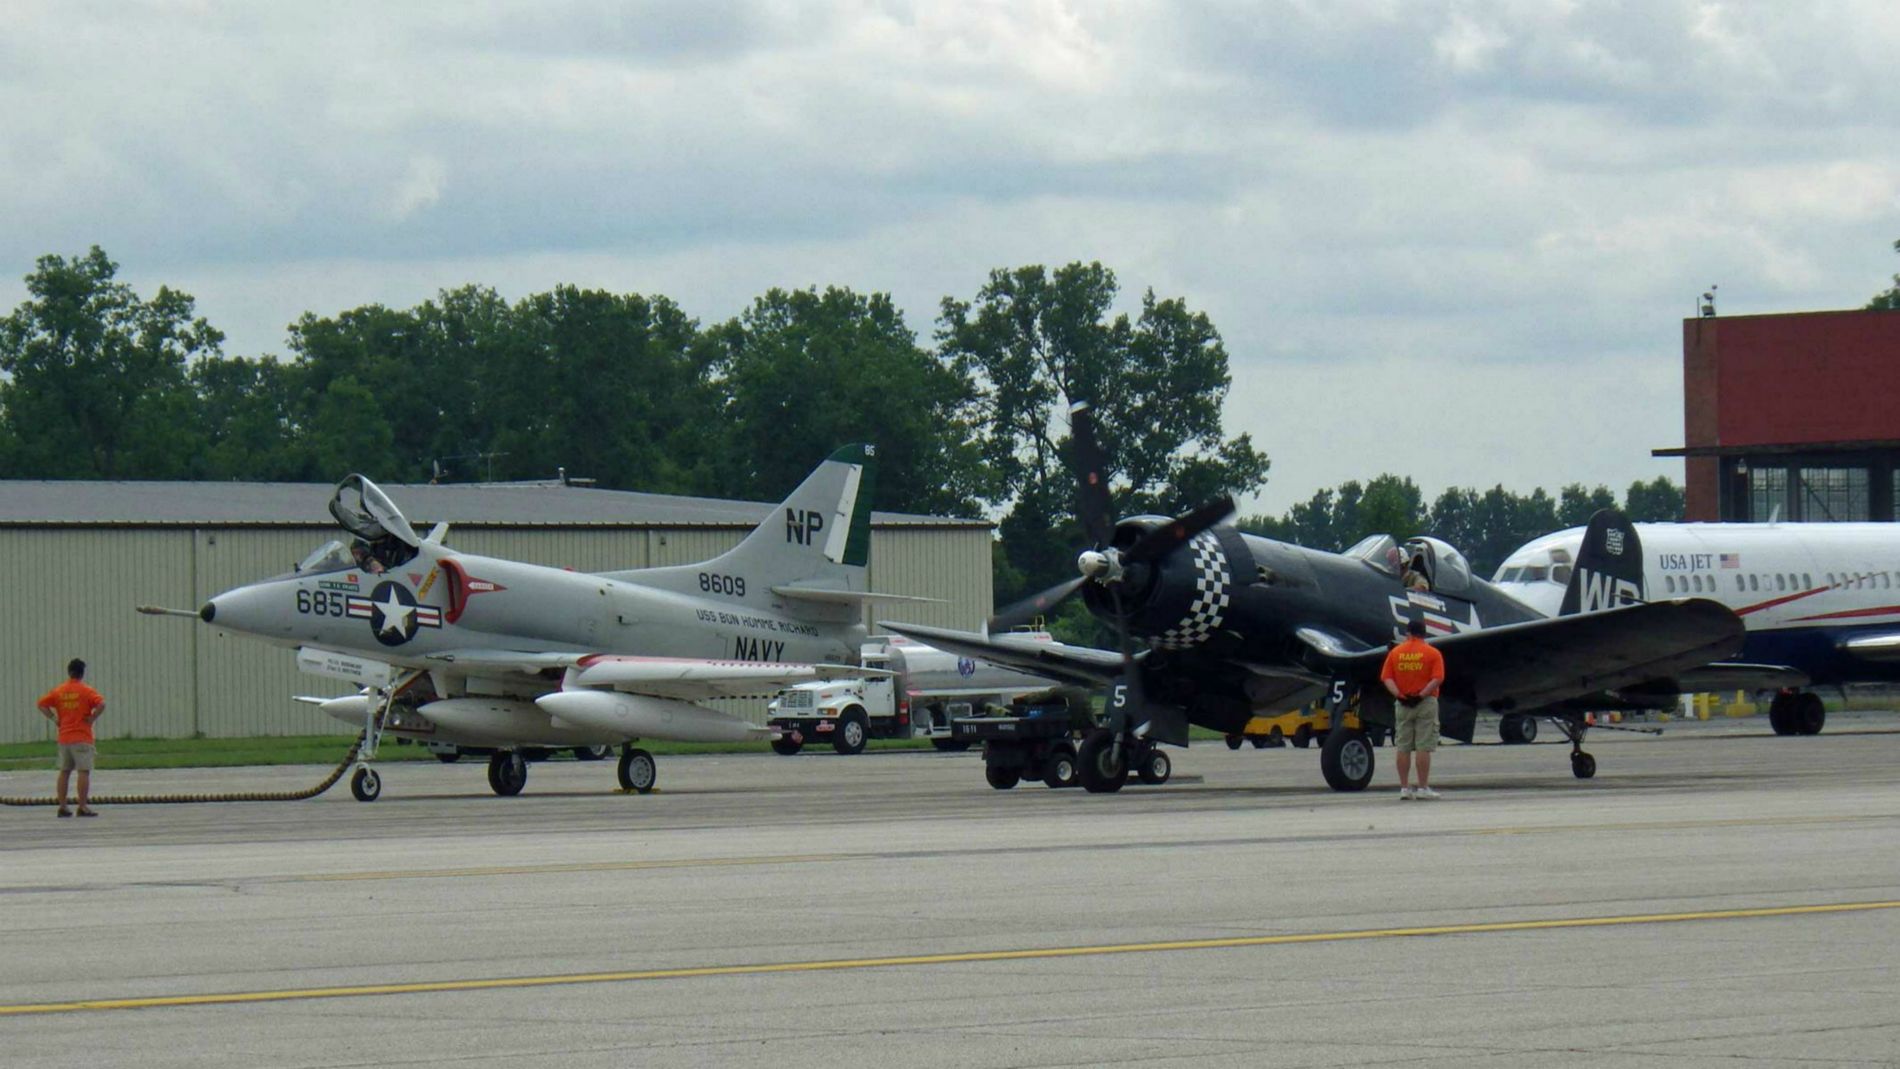 Prepping for the Heritage Flight, A-4B Skyhawk and Chance Vought F4U Corsair.